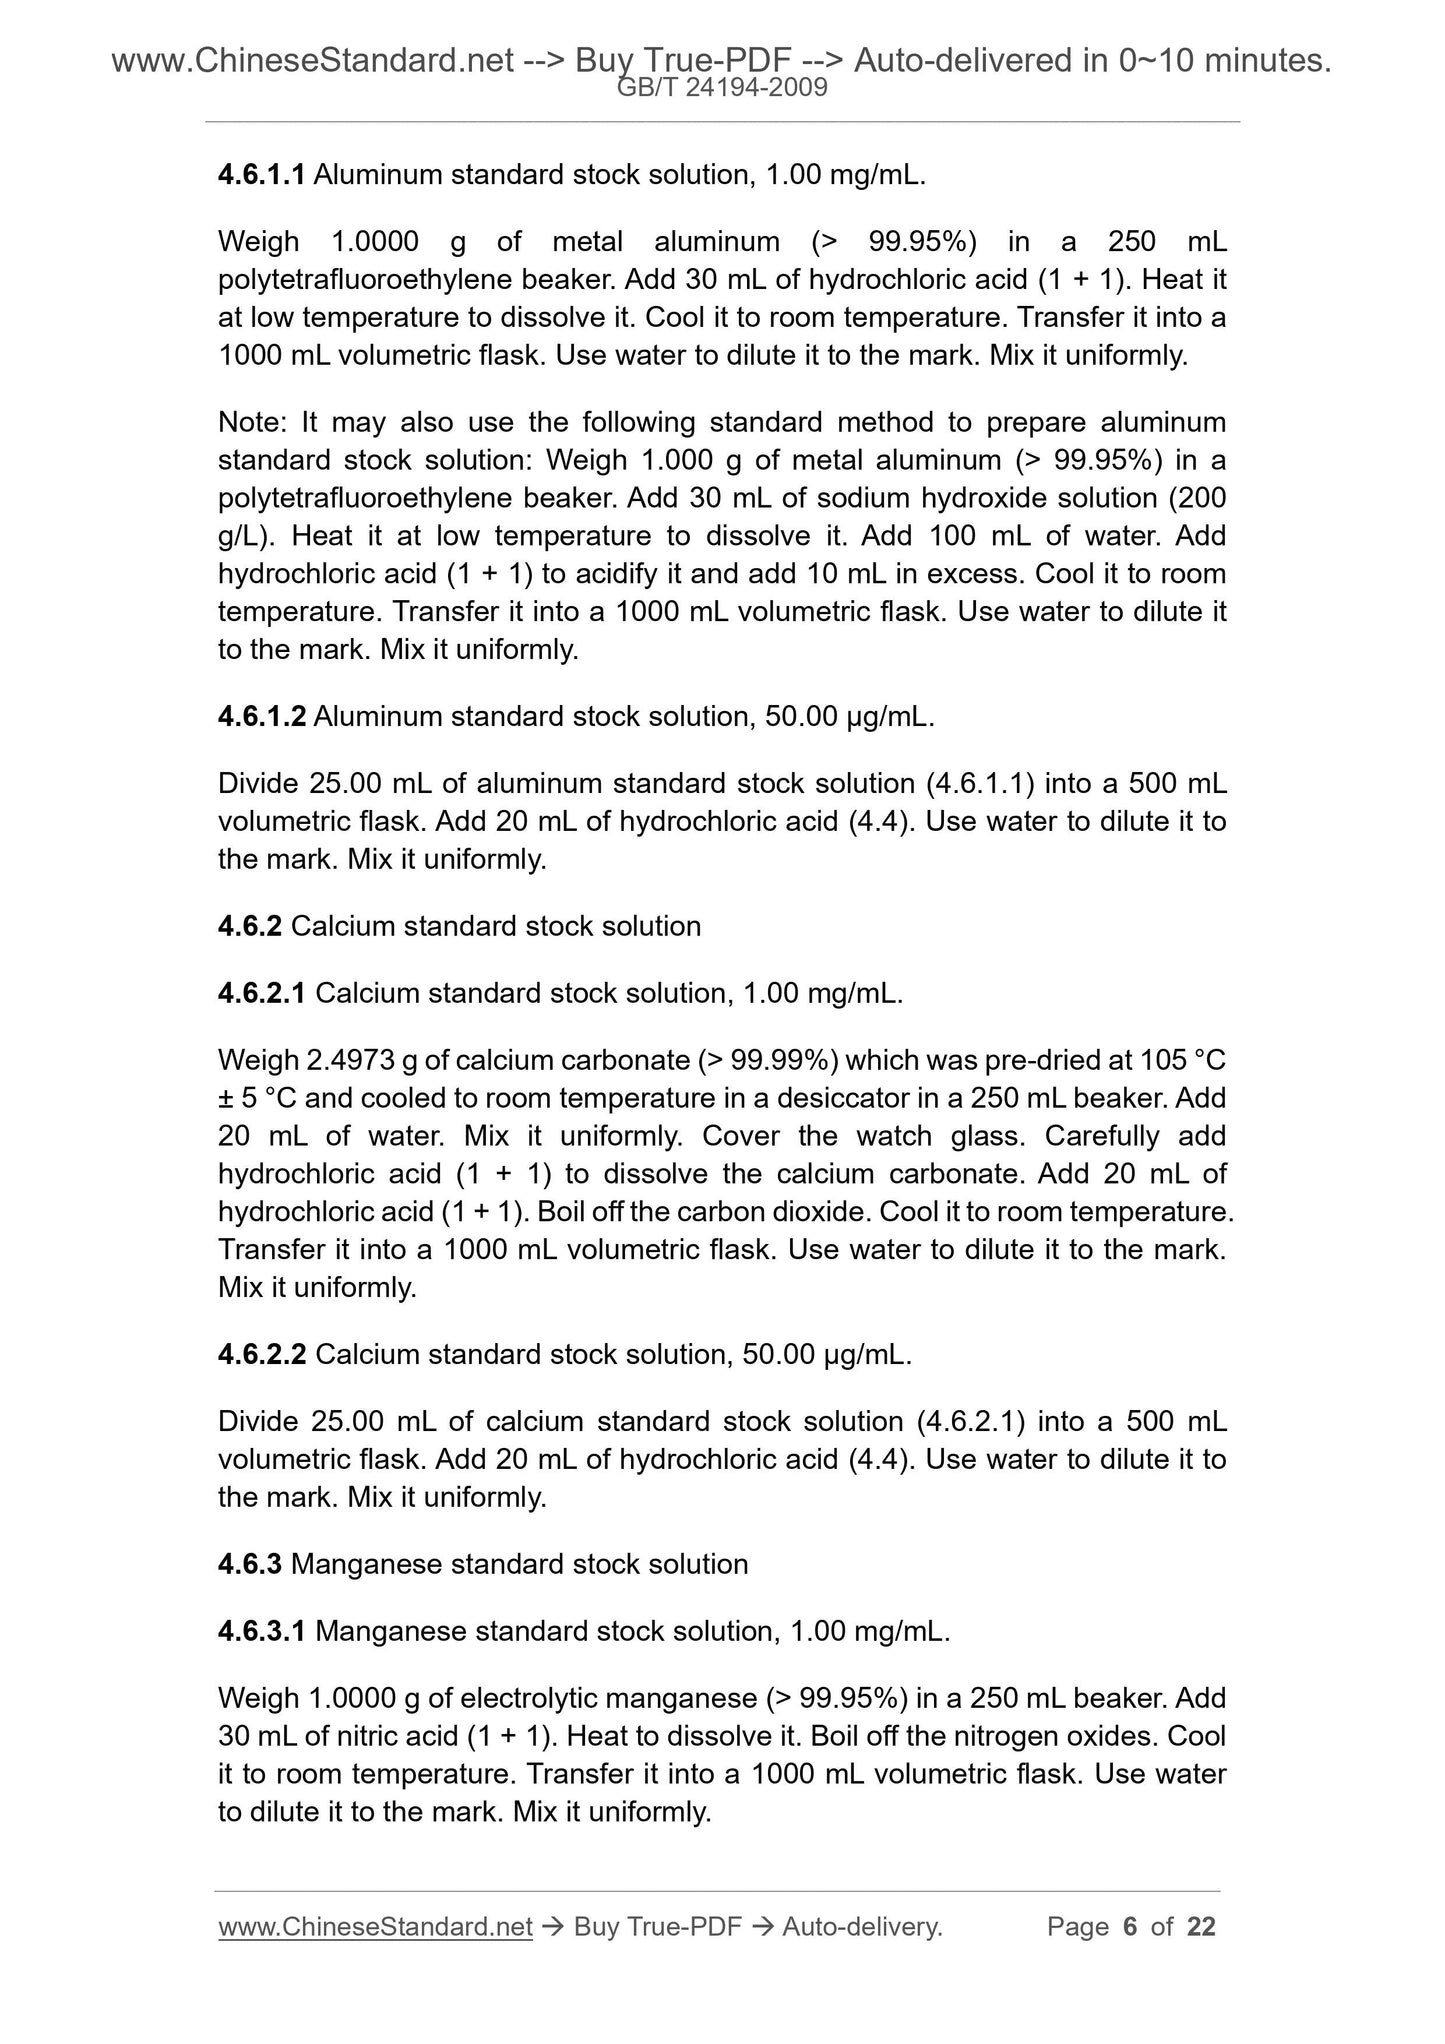 GB/T 24194-2009 Page 4